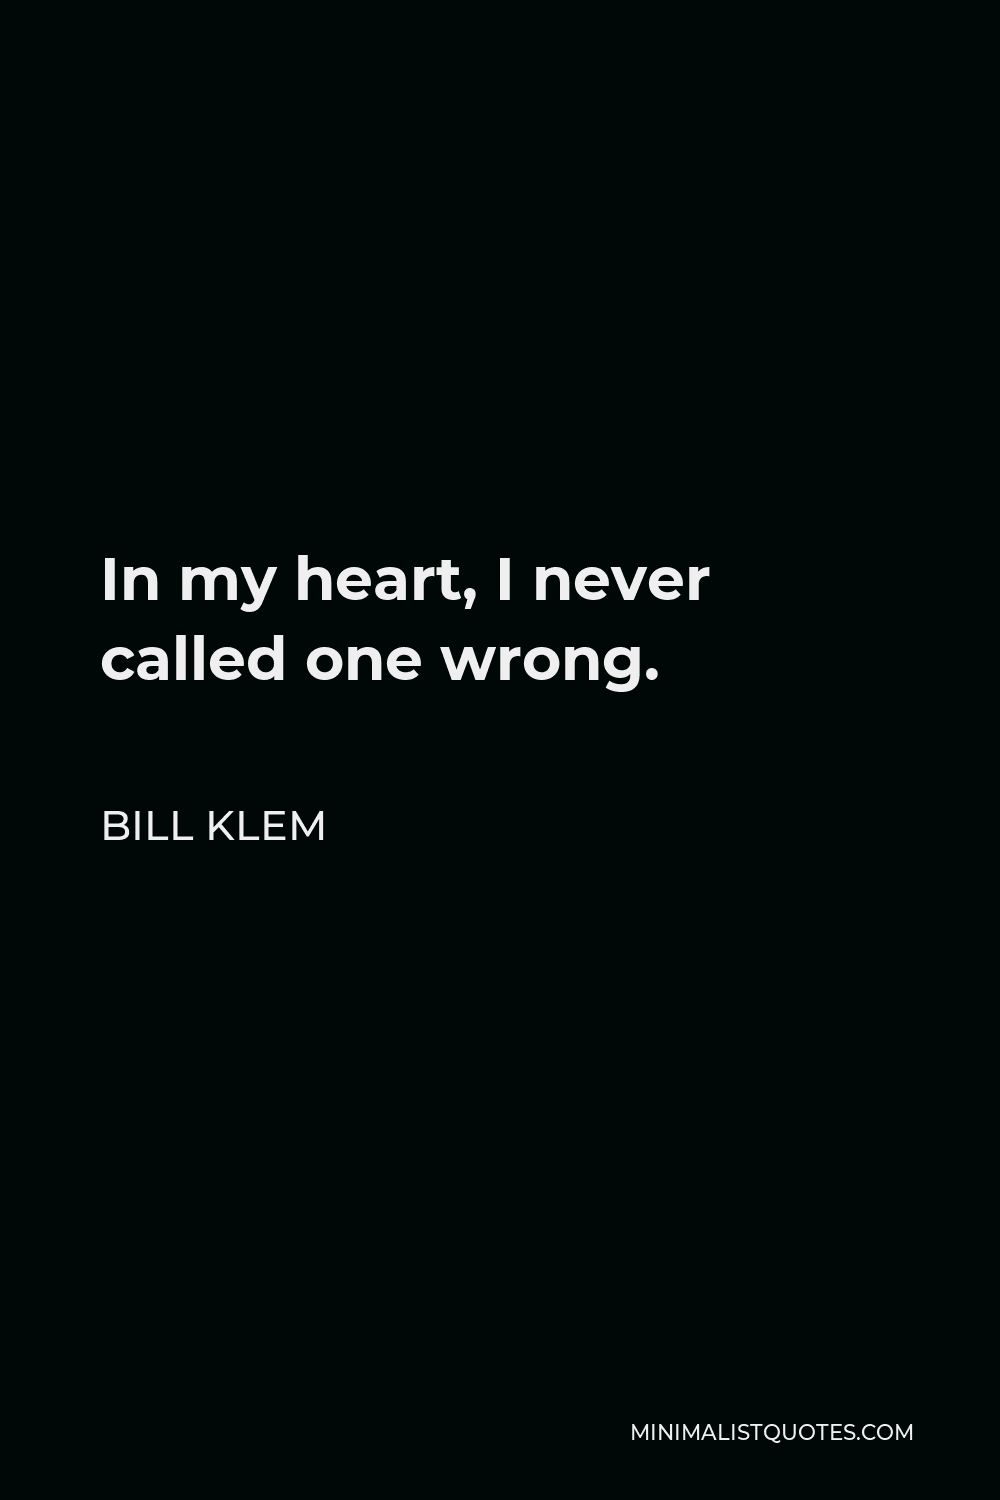 Bill Klem Quote - In my heart, I never called one wrong.